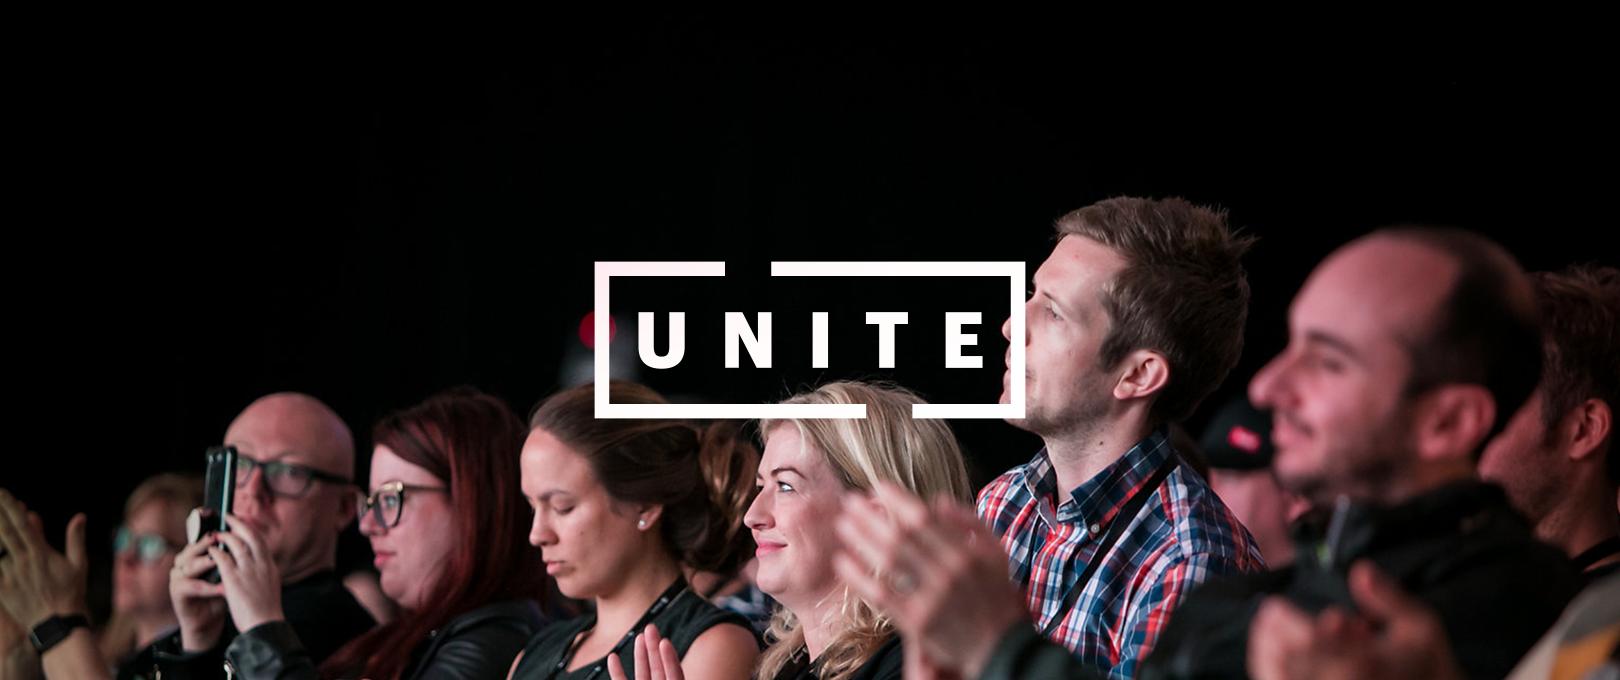 Shopify Unite is a Glimpse at the Future of Commerce